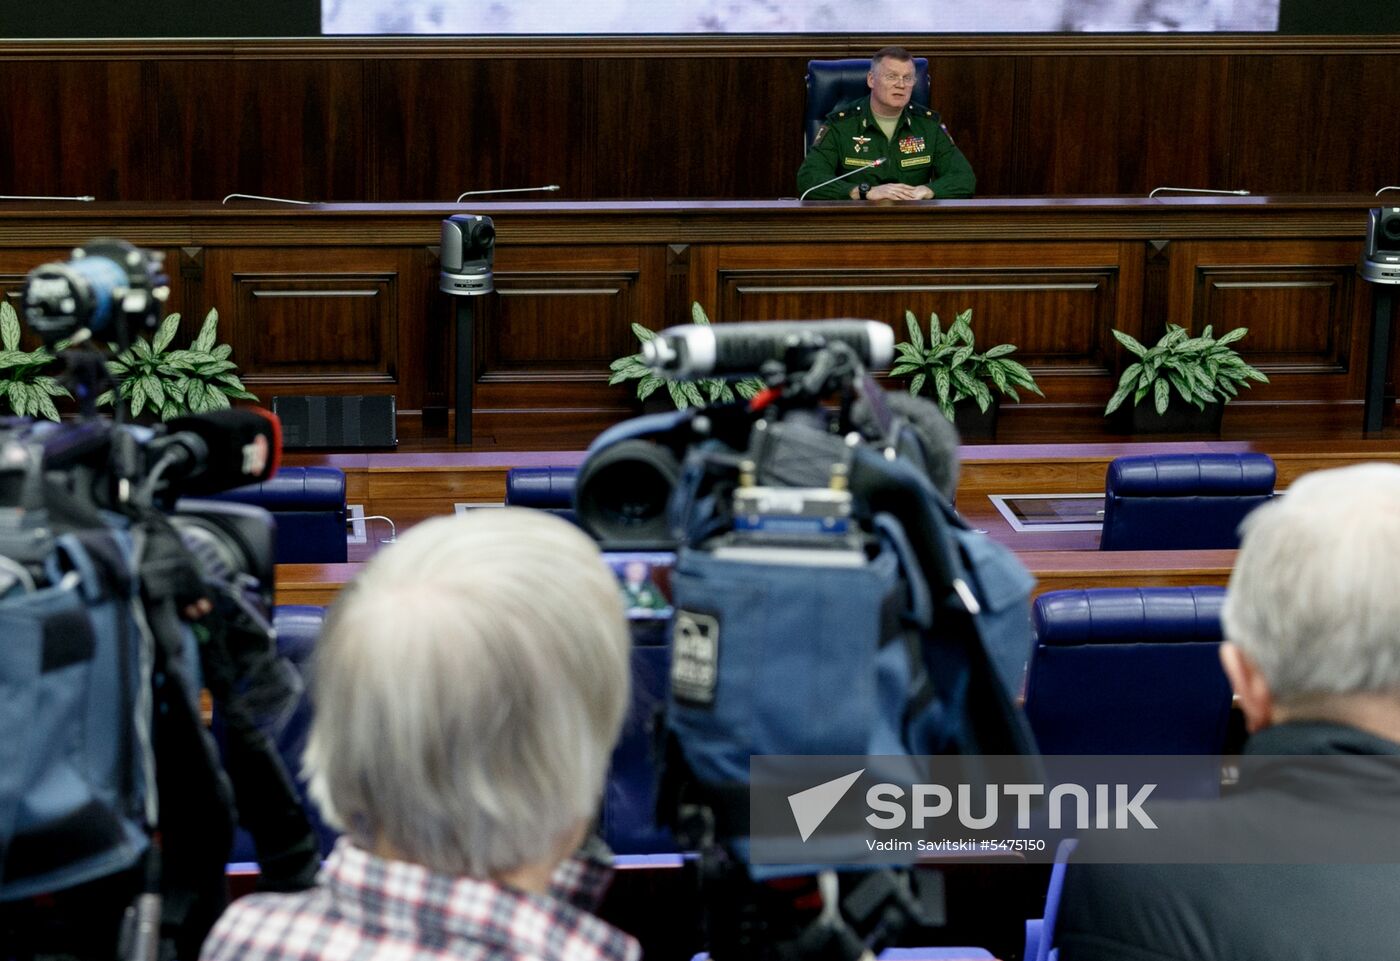 Defense Ministry's briefing on situation in Syria